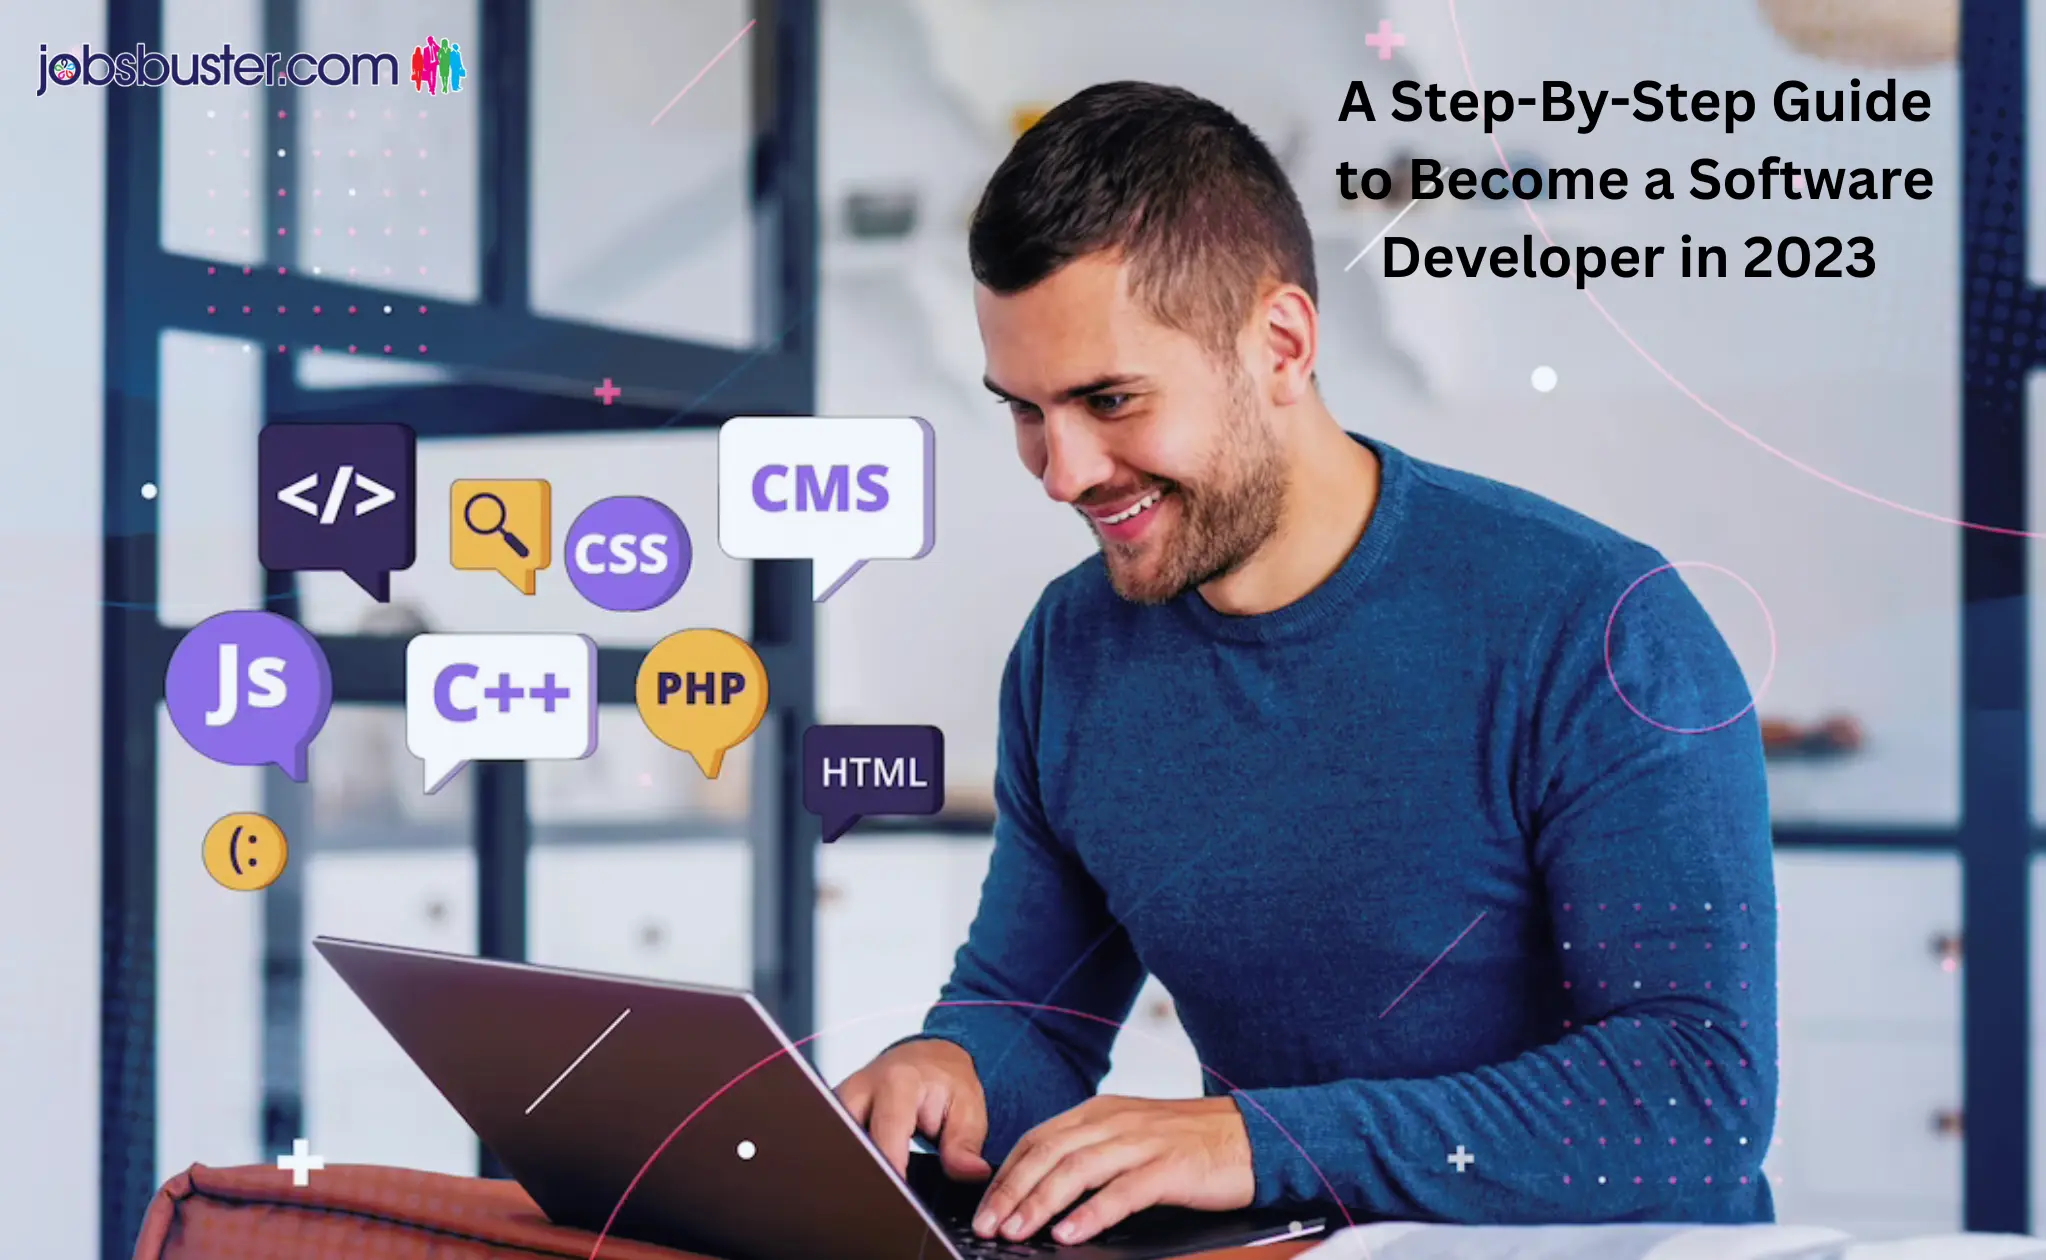 A Step-By-Step Guide to Become a Software Developer in 2023